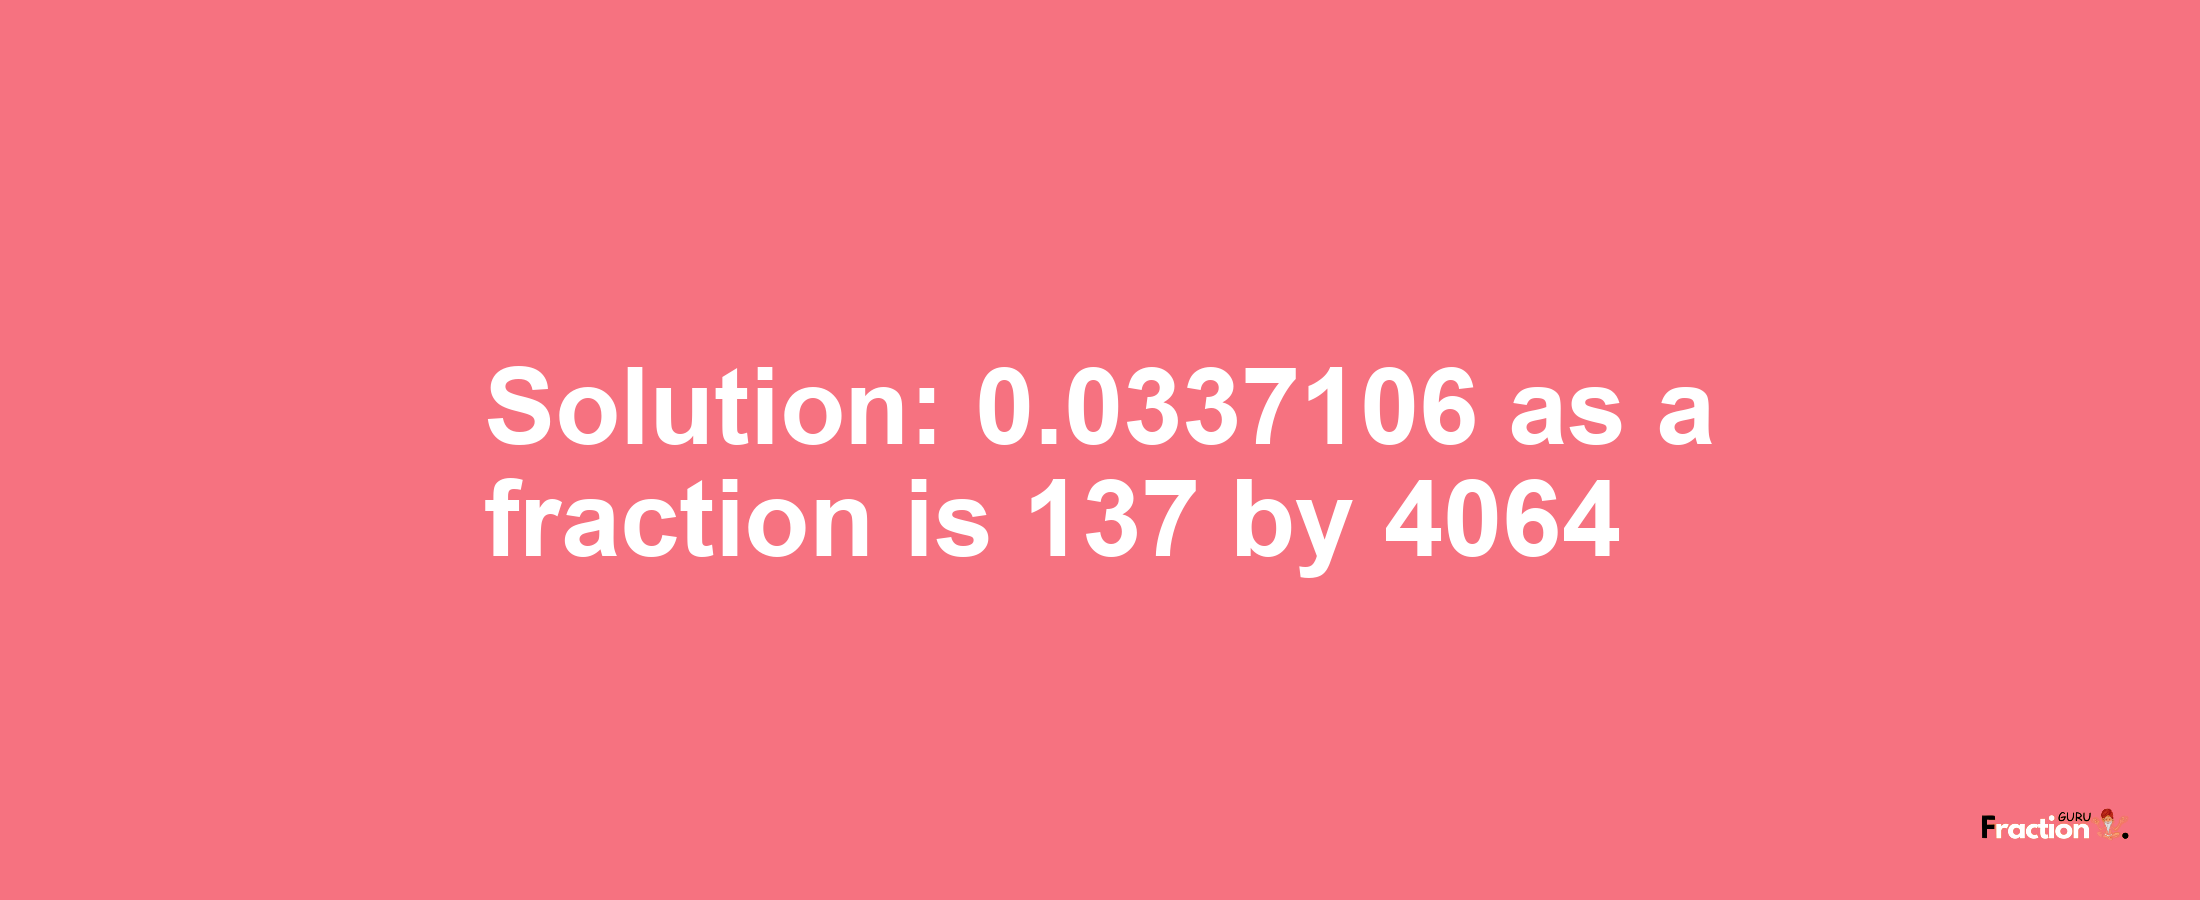 Solution:0.0337106 as a fraction is 137/4064